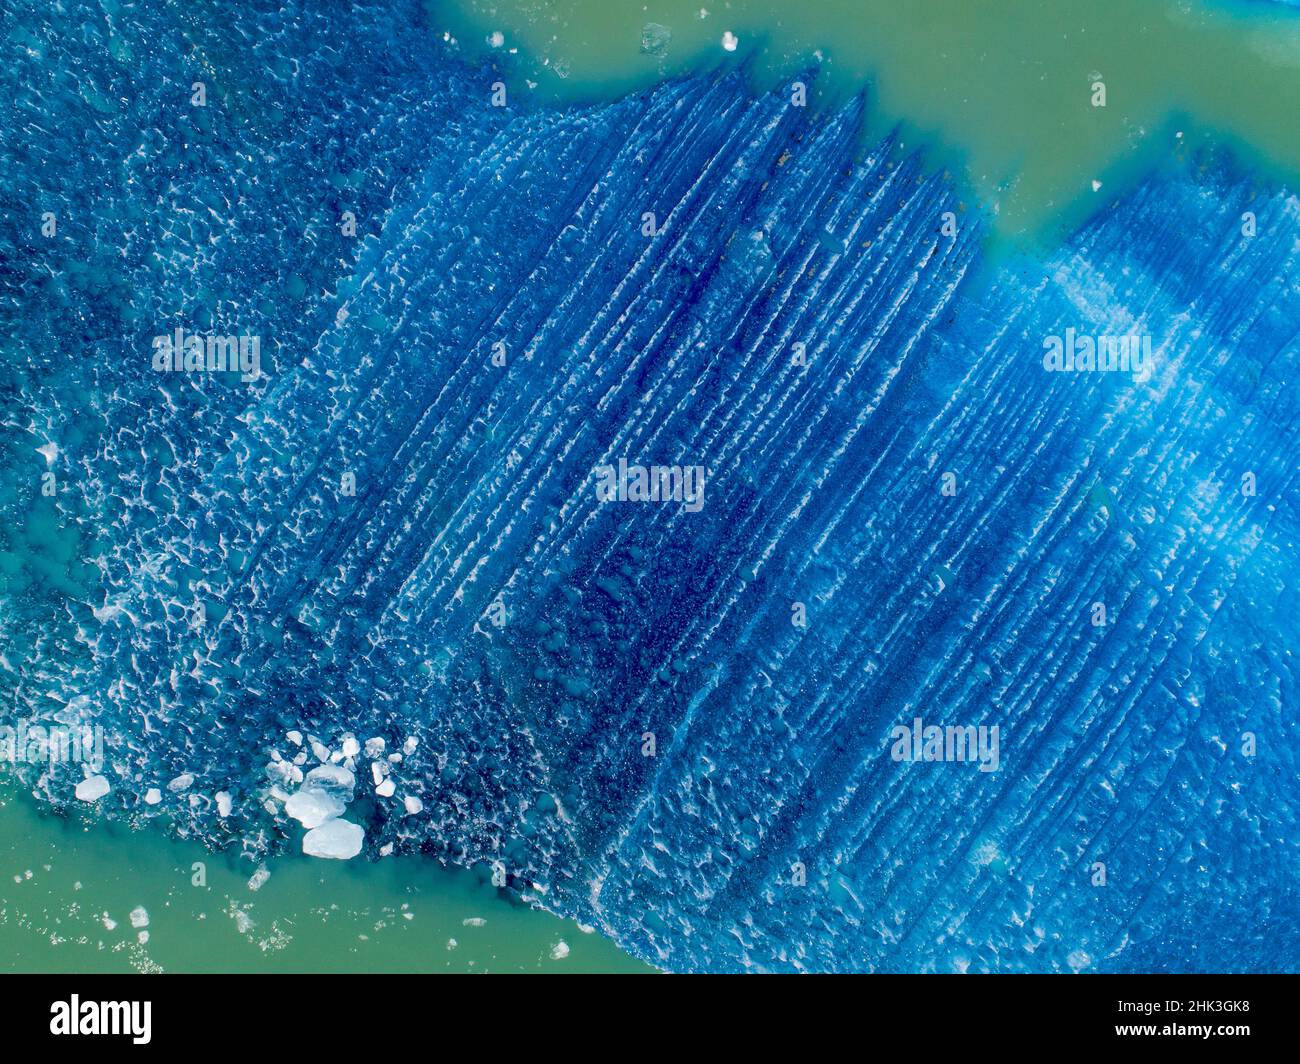 USA, Alaska, Tracy Arm-Fords Terror Wilderness, Aerial view of floating iceberg calved from South Sawyer Glacier in Tracy Arm on summer morning Stock Photo